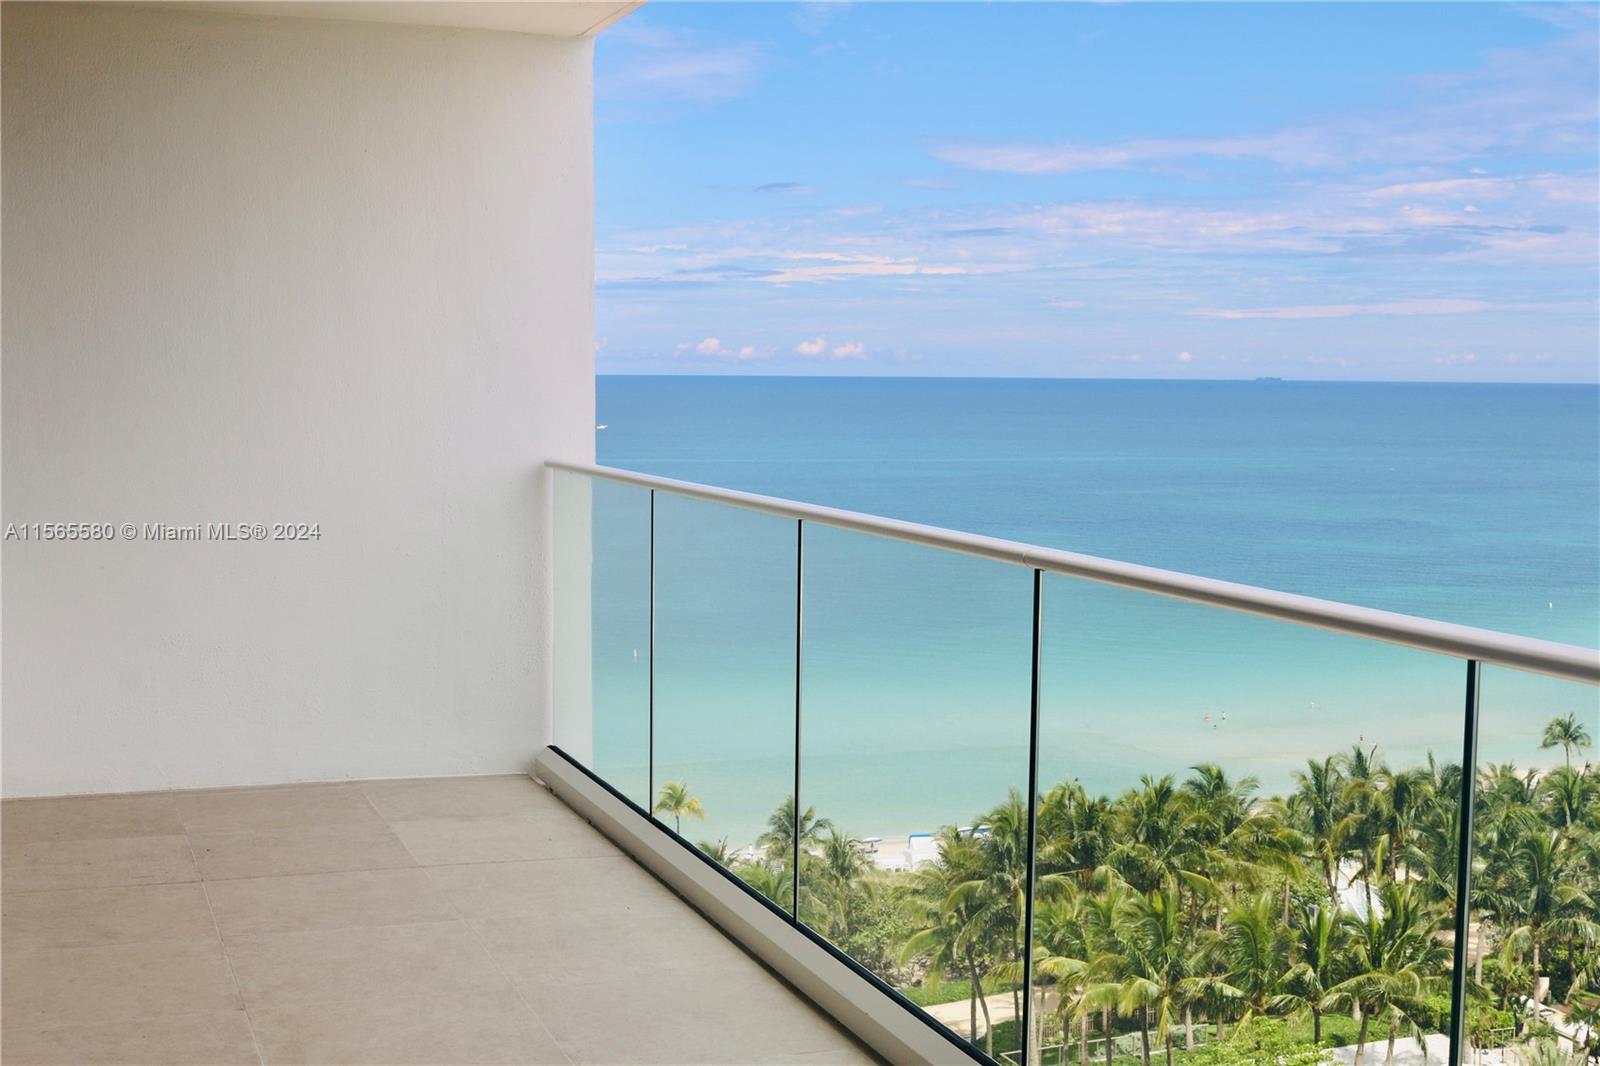 Bal Harbour Beach Condo Balmoral, across the world-famous Bal Harbour Shops, next to St. Regis Hotel,  ocean views with this south-exposure residence from all windows. A bright unit 19th floor with 1,688 SqFt. 2 bedrooms, an enormous Master Bedroom with a large walking closet, space for a desk, and sofas to enjoy the ocean views from your window. The dining room can be turned into a 3rd bedroom or Den + 2 full baths. A custom-made kitchen, formal dining, and large living room. Ocean views from the new glass balcony are ready to enjoy. Five Star amenities. Enjoy the beach lifestyle, the oceanfront pool, cabanas, gym, valet parking, restaurant, salons for parties, playing area, 3 Tennis courts